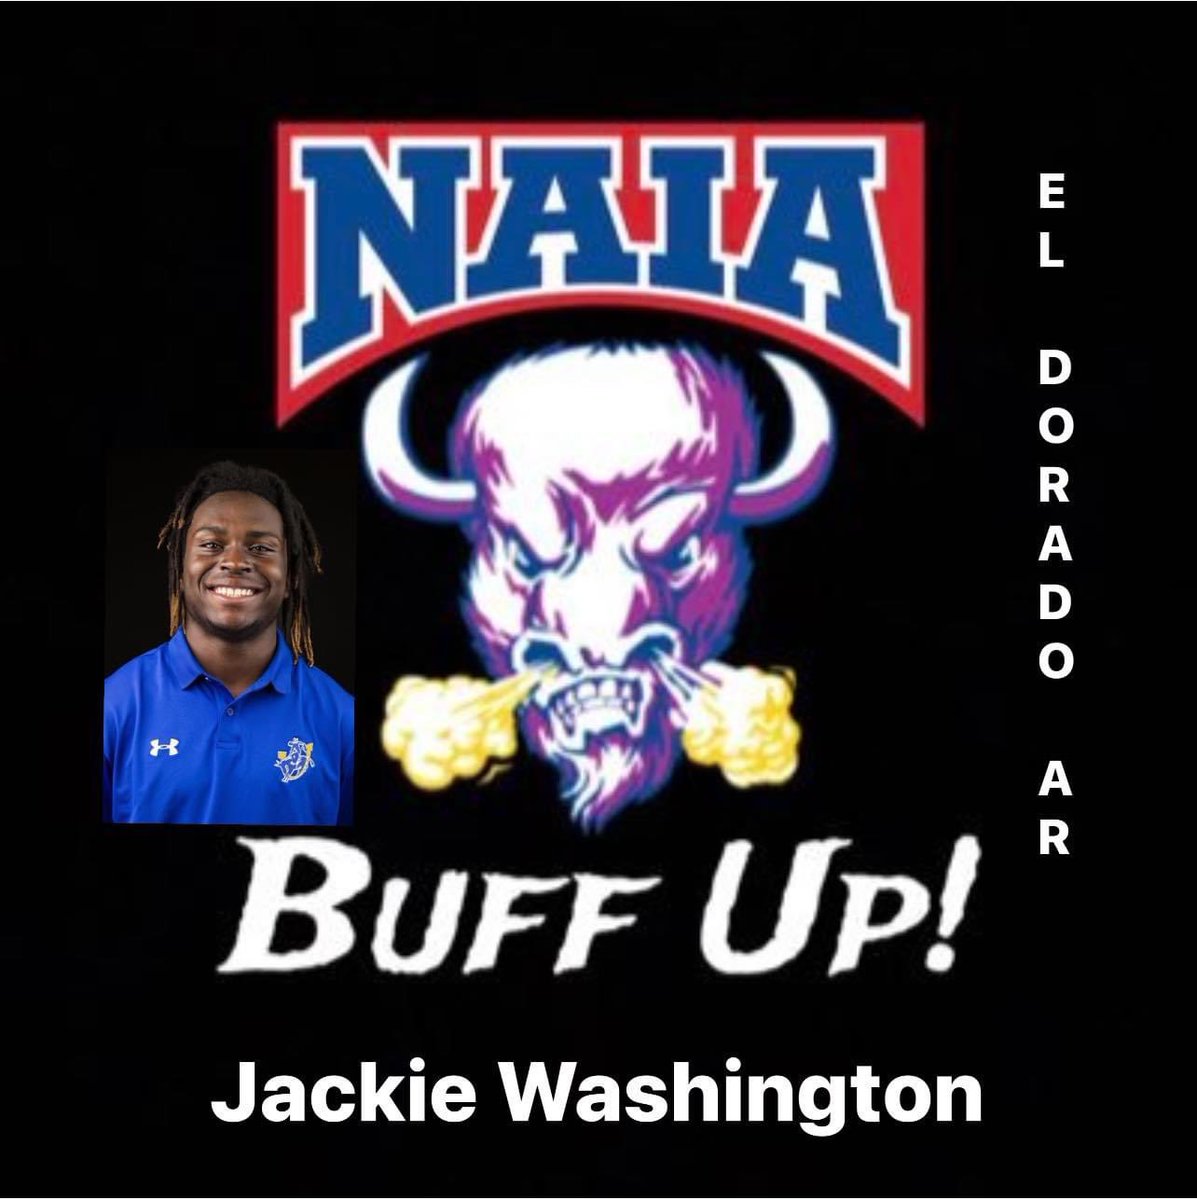 My new beginning💜 Let’s go be great!!  
@coachbailey_abc #buffup